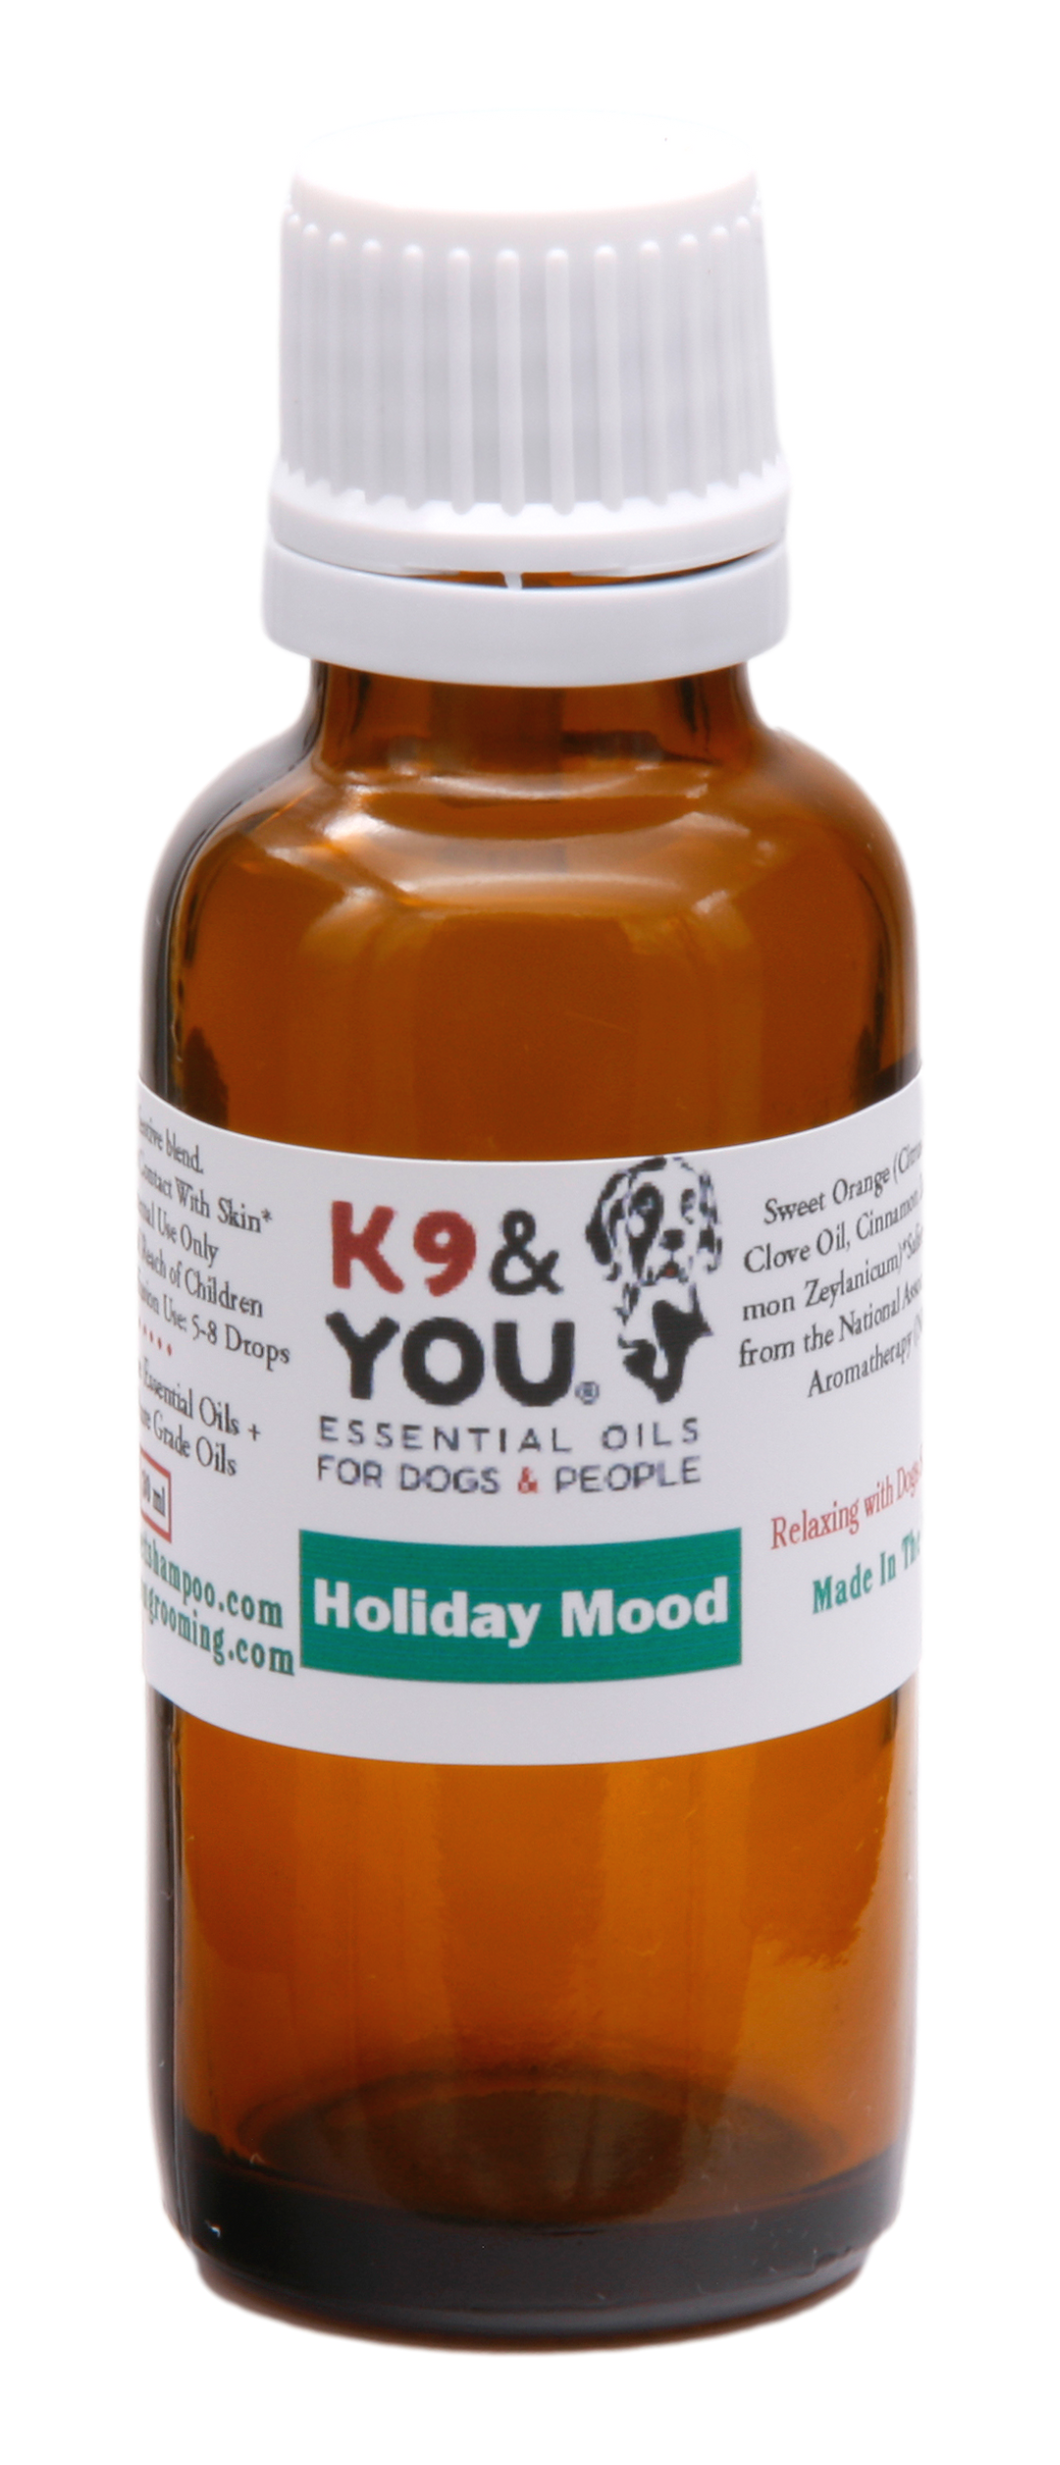 Holiday Mood Aromatherapy Fragrance Oil Blend